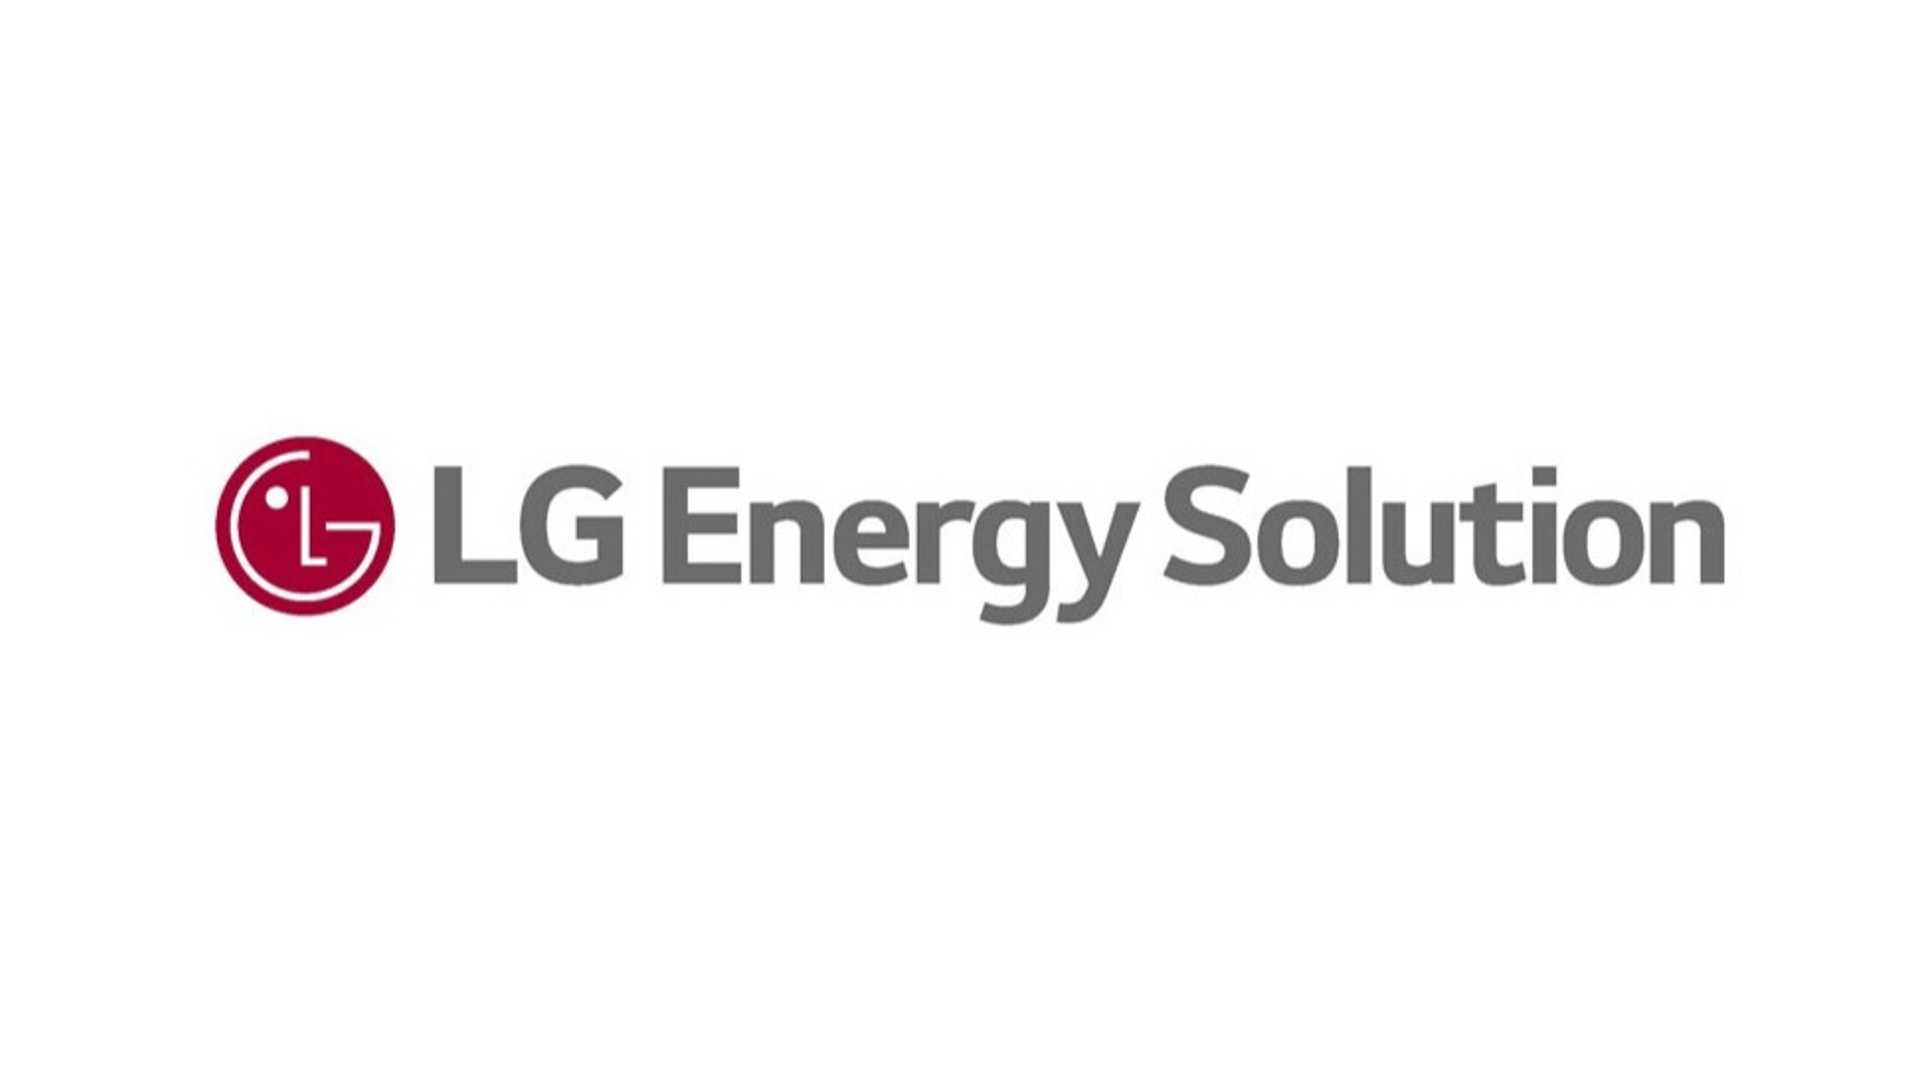 LG Energy Solution signed joint venture to produce EV batteries with Honda 